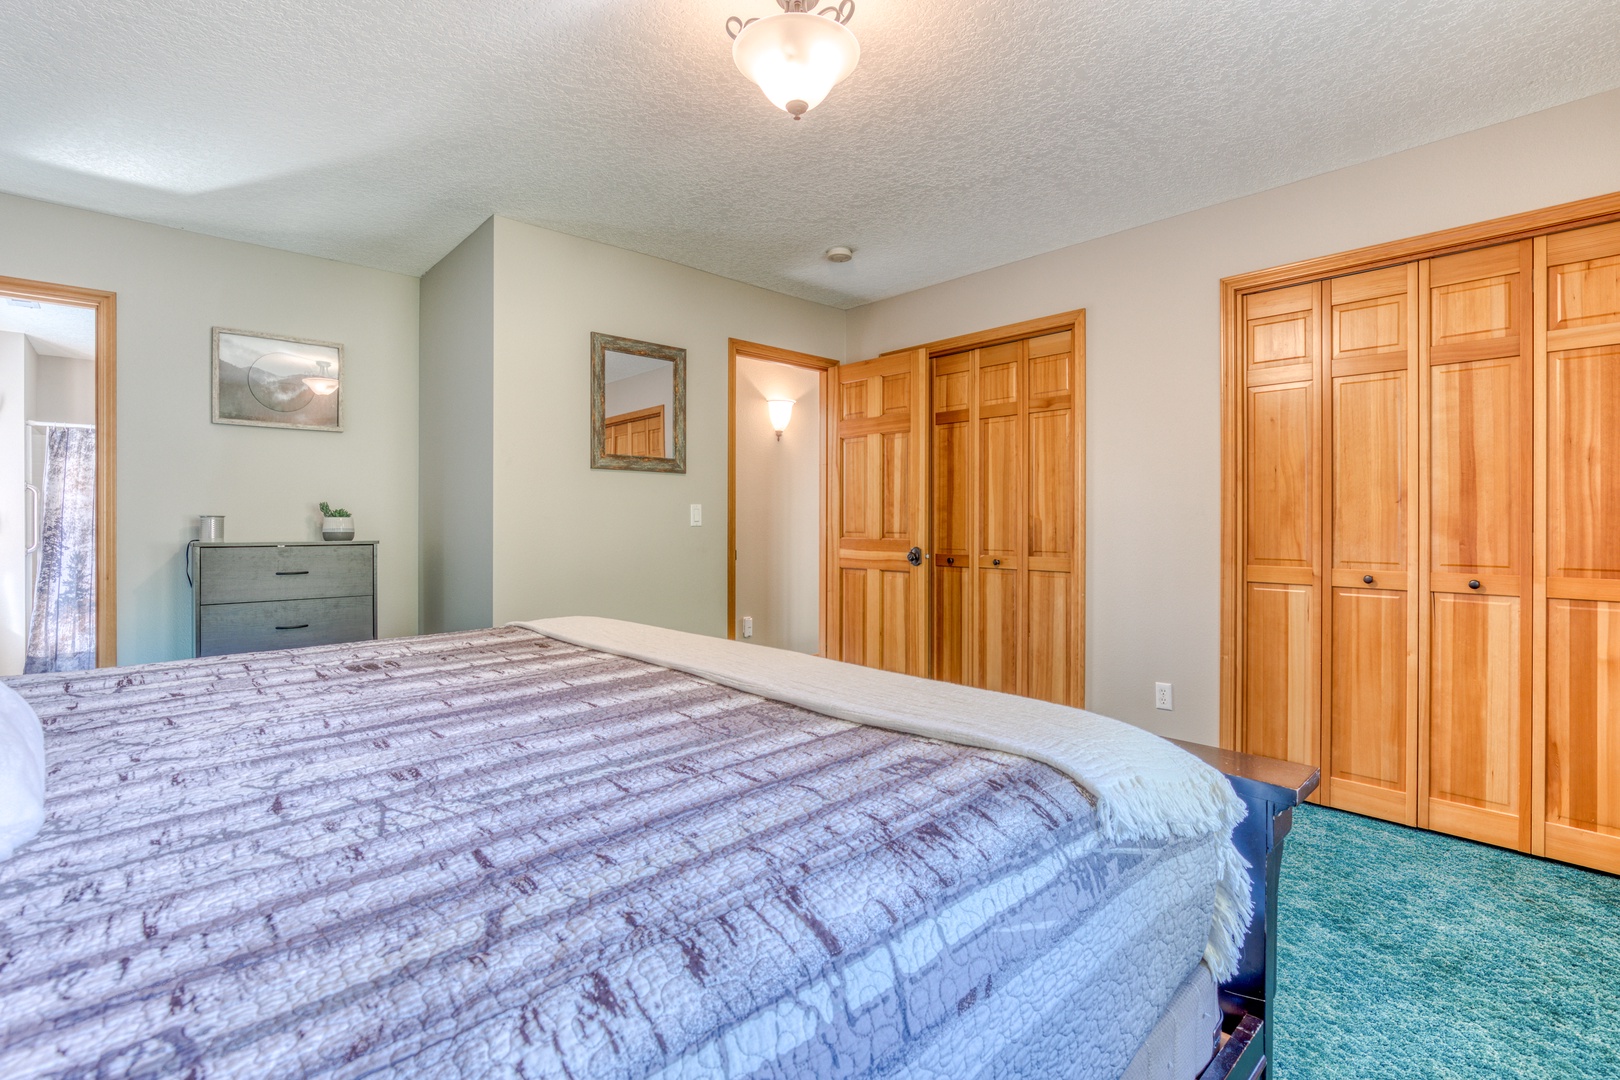 Sandy Vacation Rentals, Iron Mountain - King bed in Guest bedroom